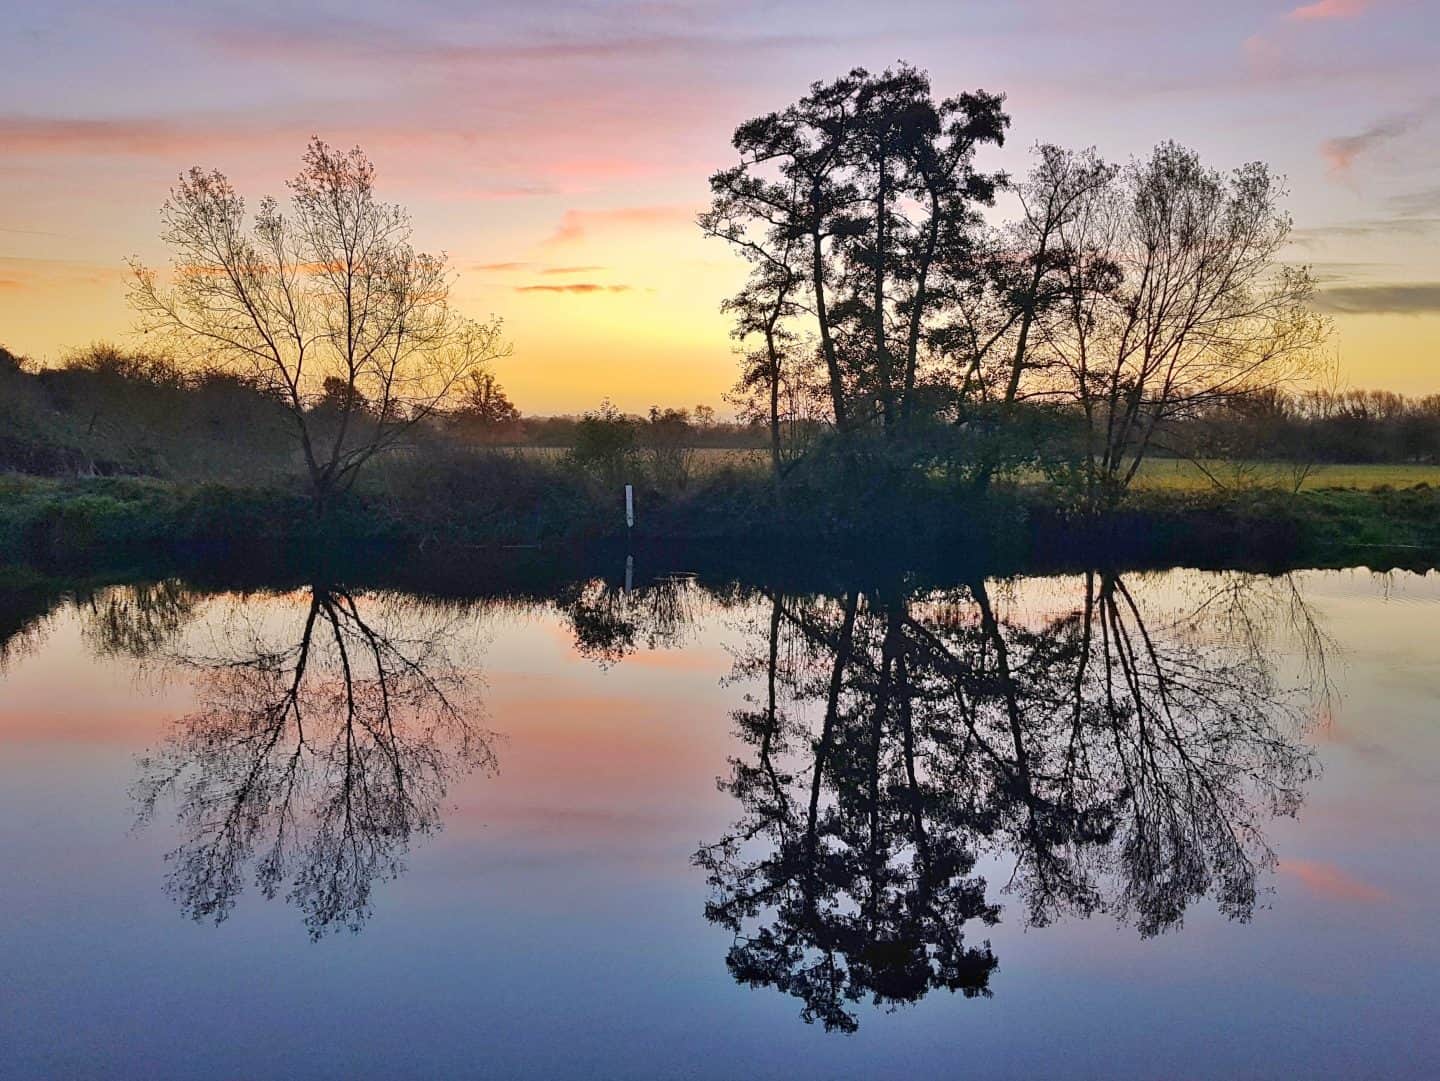 Outdoor swimming spot in Fladbury, Worcestershire | depicts the river at sunrise with reflections of the trees and sunrise colours of pink and yellow. 